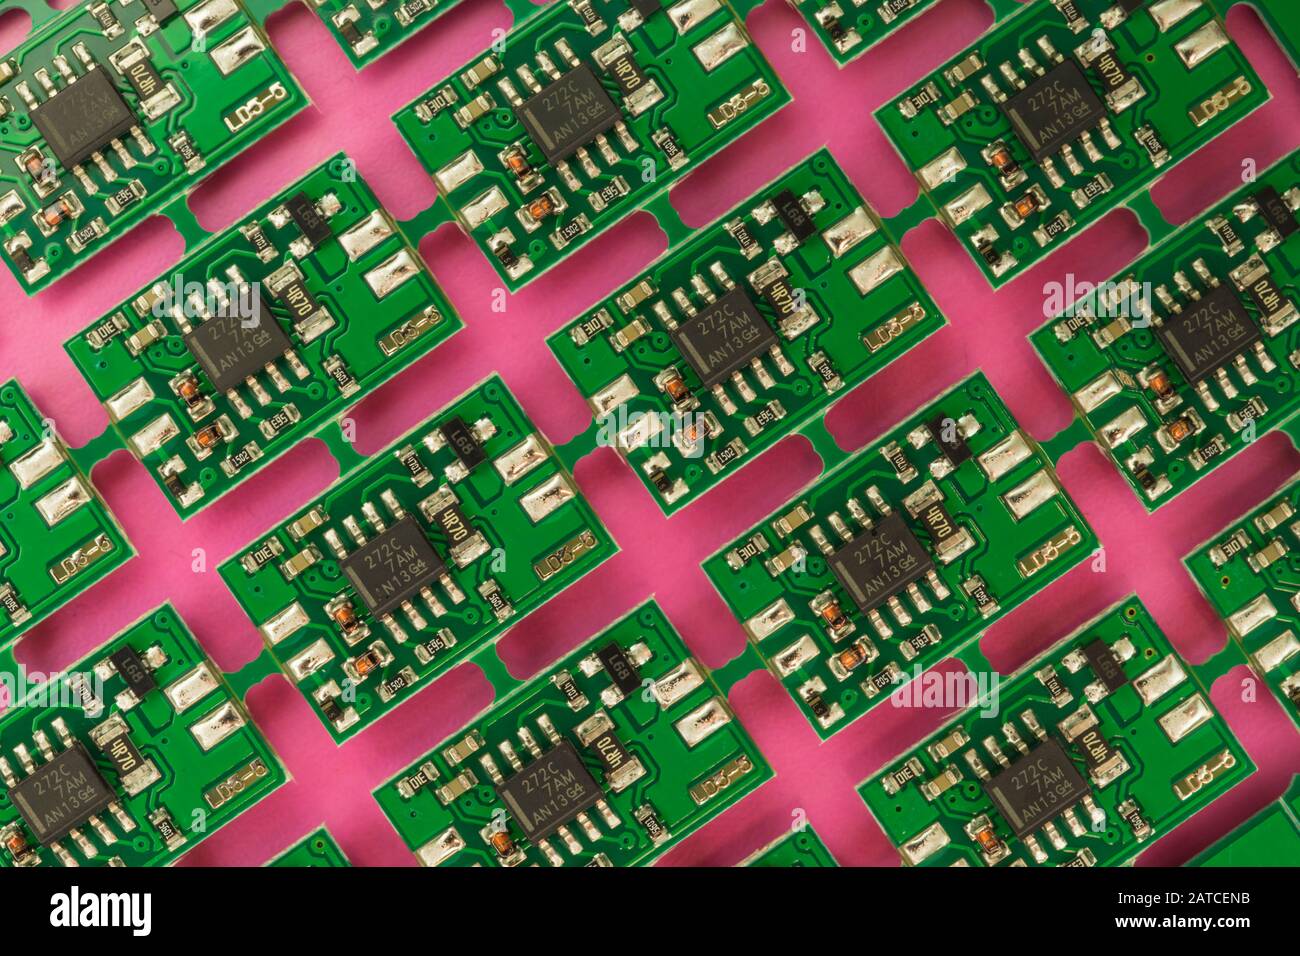 Abstract background of electronic boards. Stock Photo